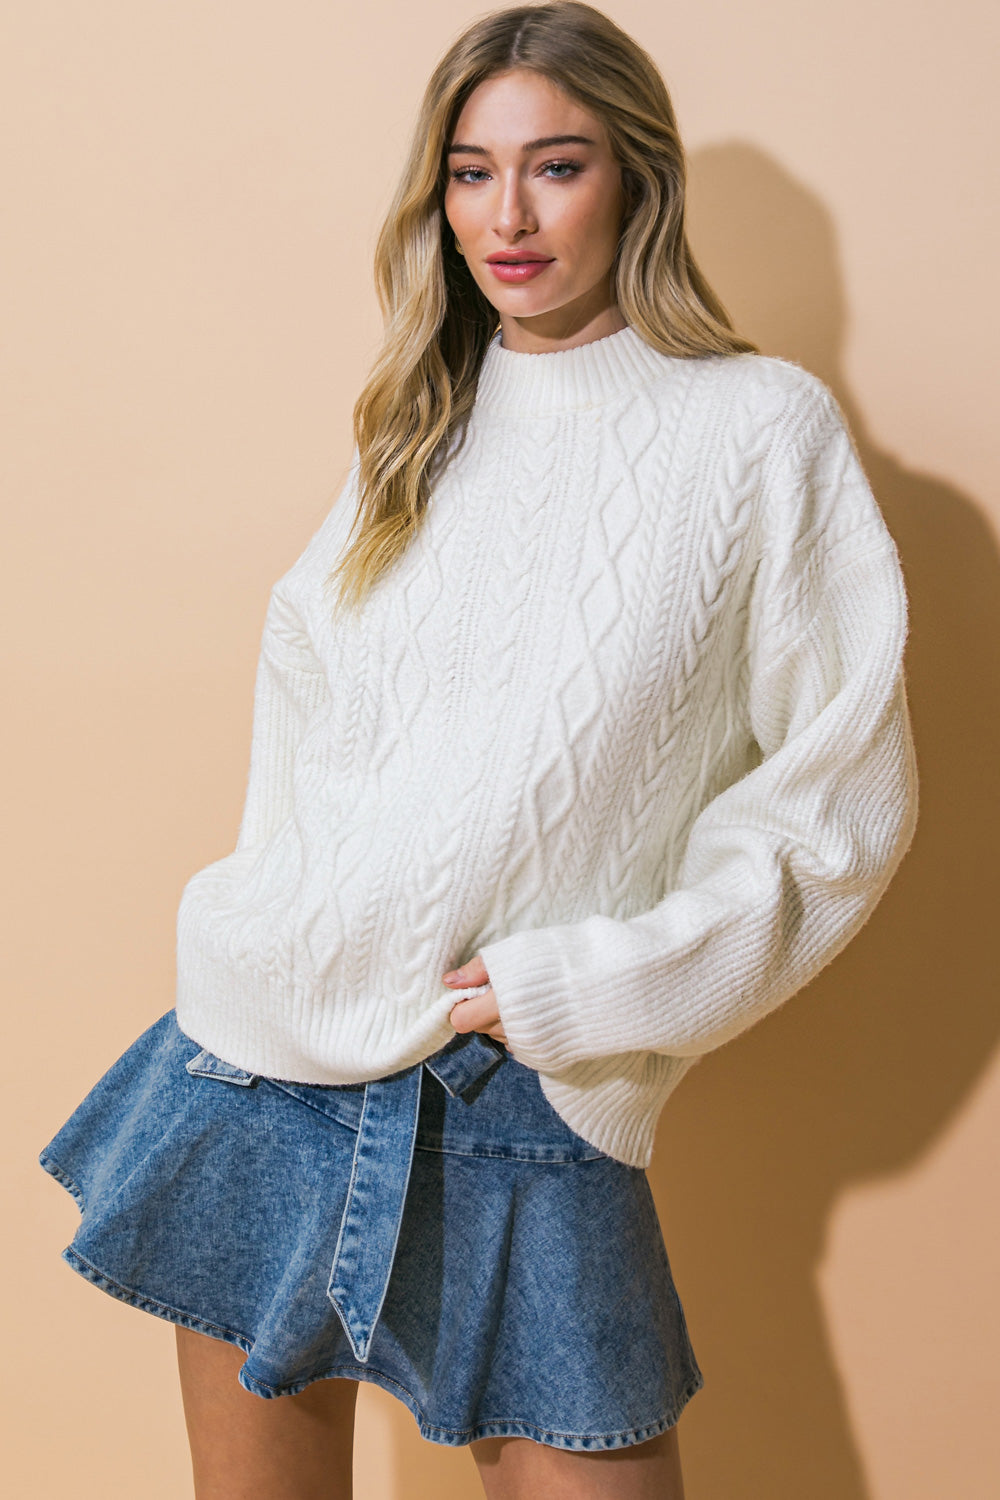 SIMPLE SOLUTIONS SWEATER TOP